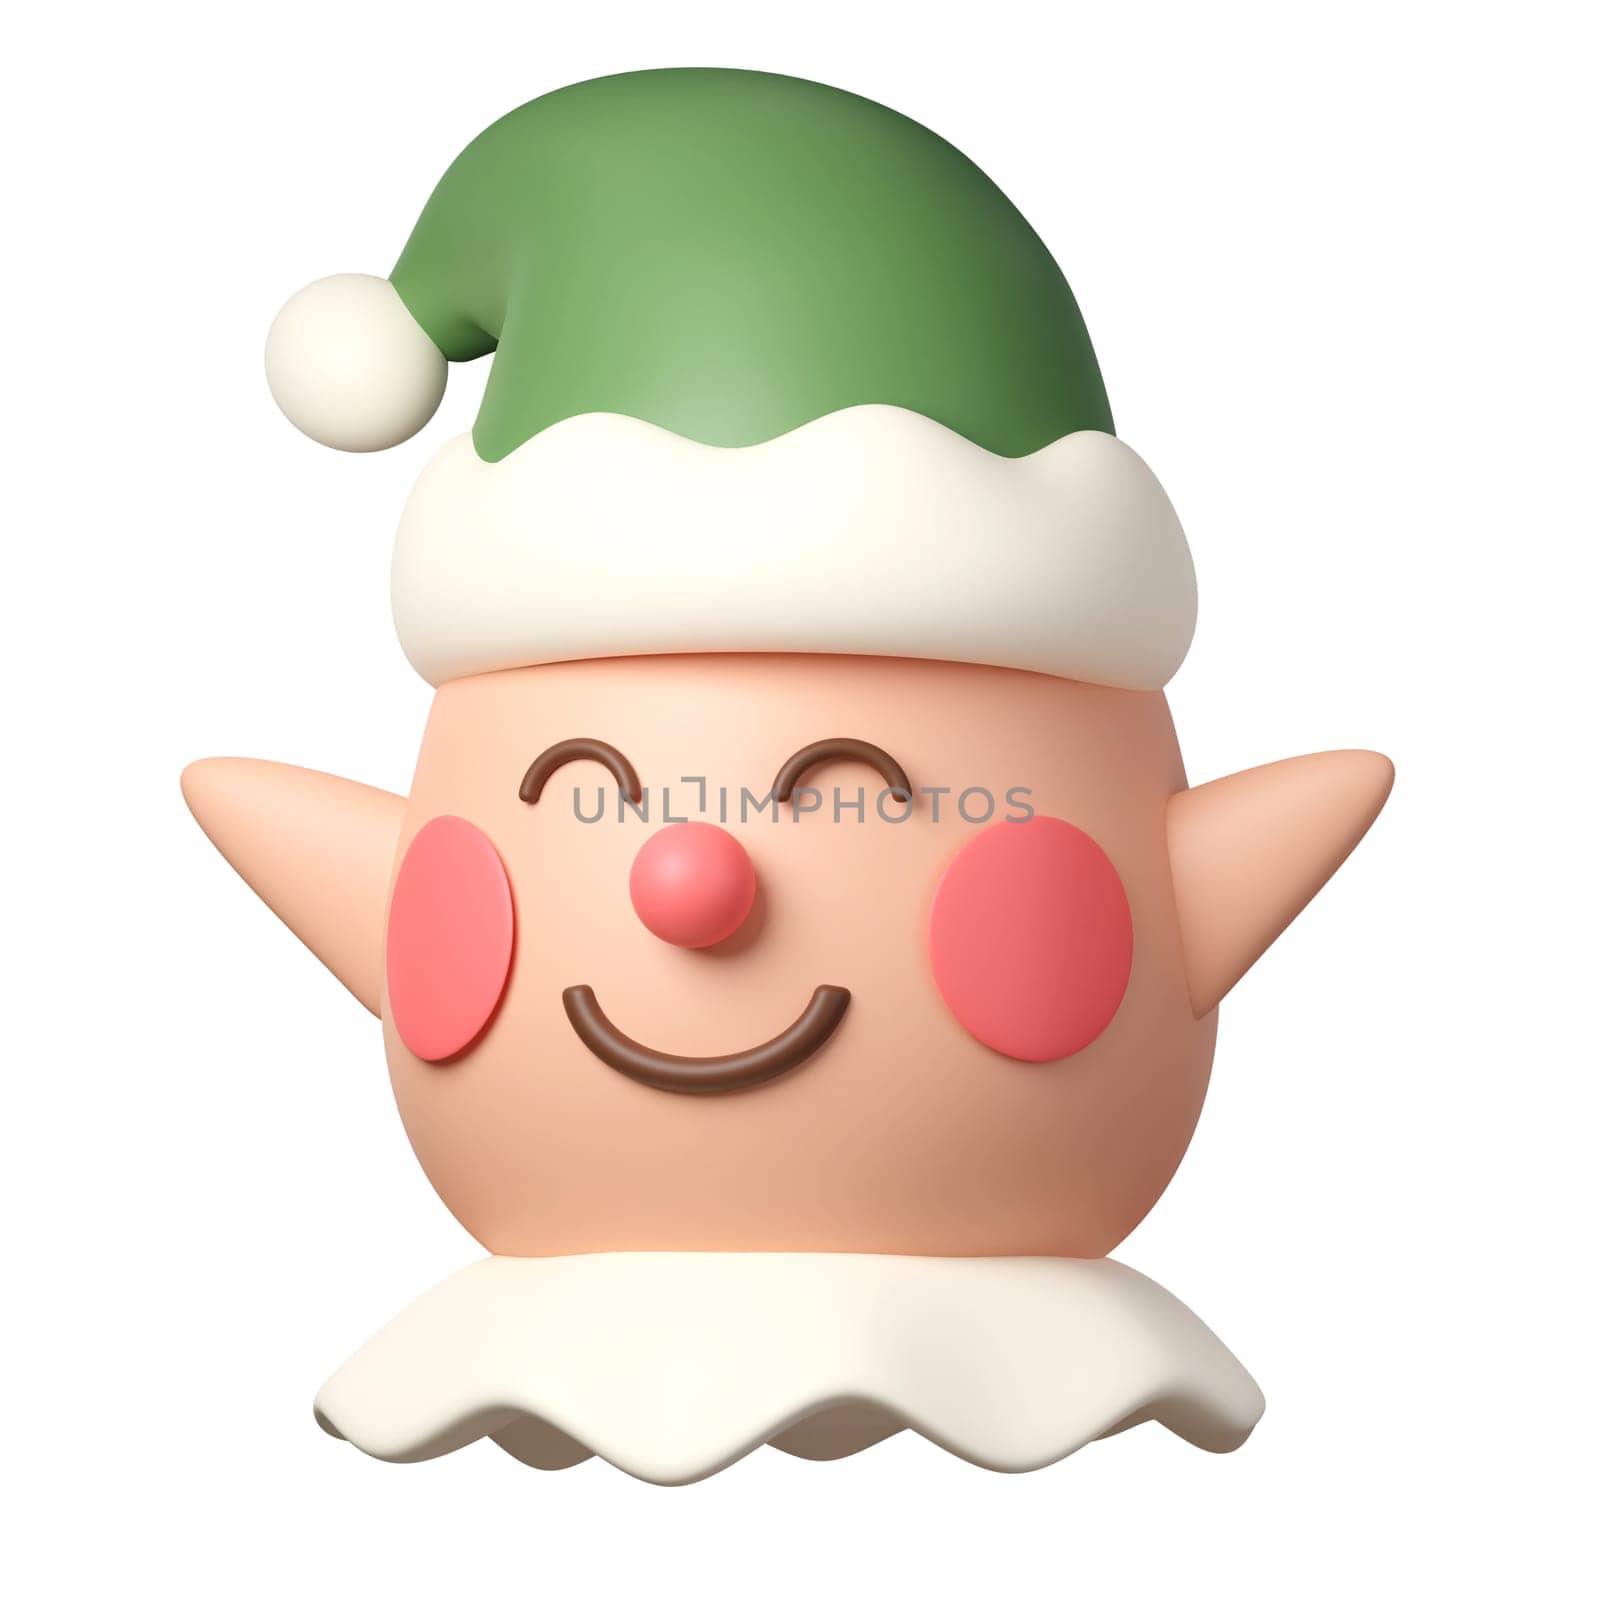 3d Christmas elf icon. minimal decorative festive conical shape tree. New Year's holiday decor. 3d design element In cartoon style. Icon isolated on white background. 3d illustration.